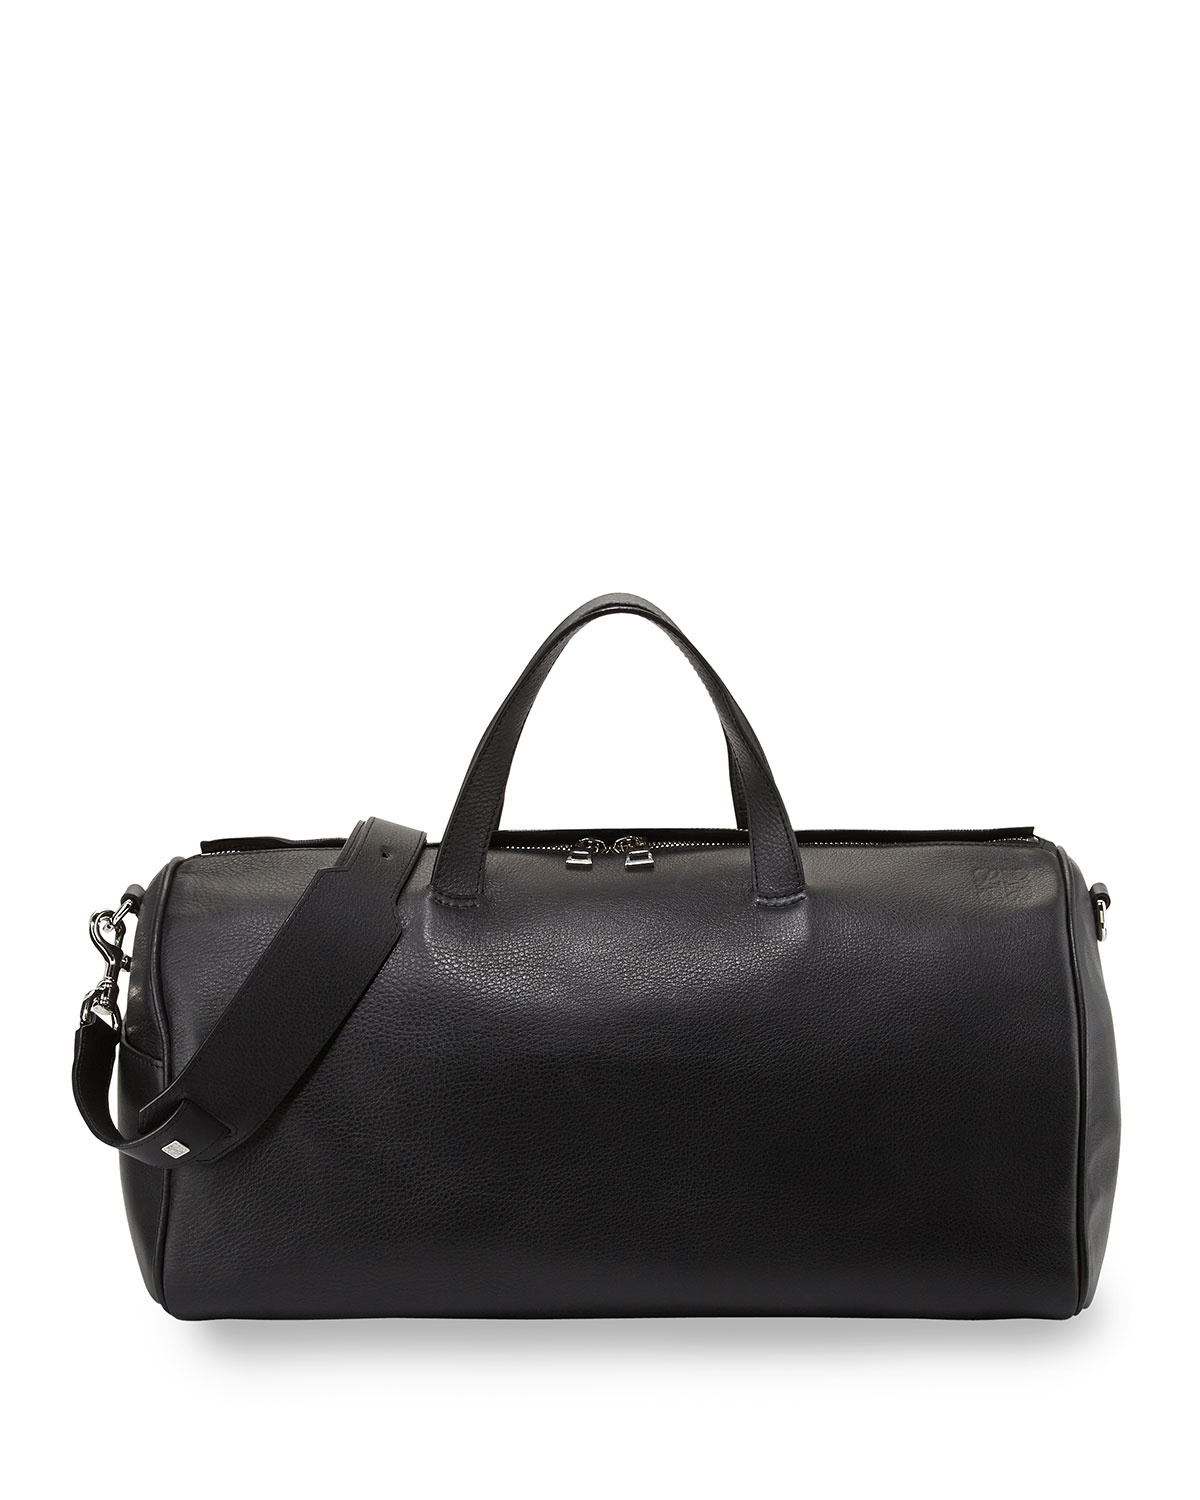 Loewe Small Leather Duffle Bag in Black for Men - Lyst